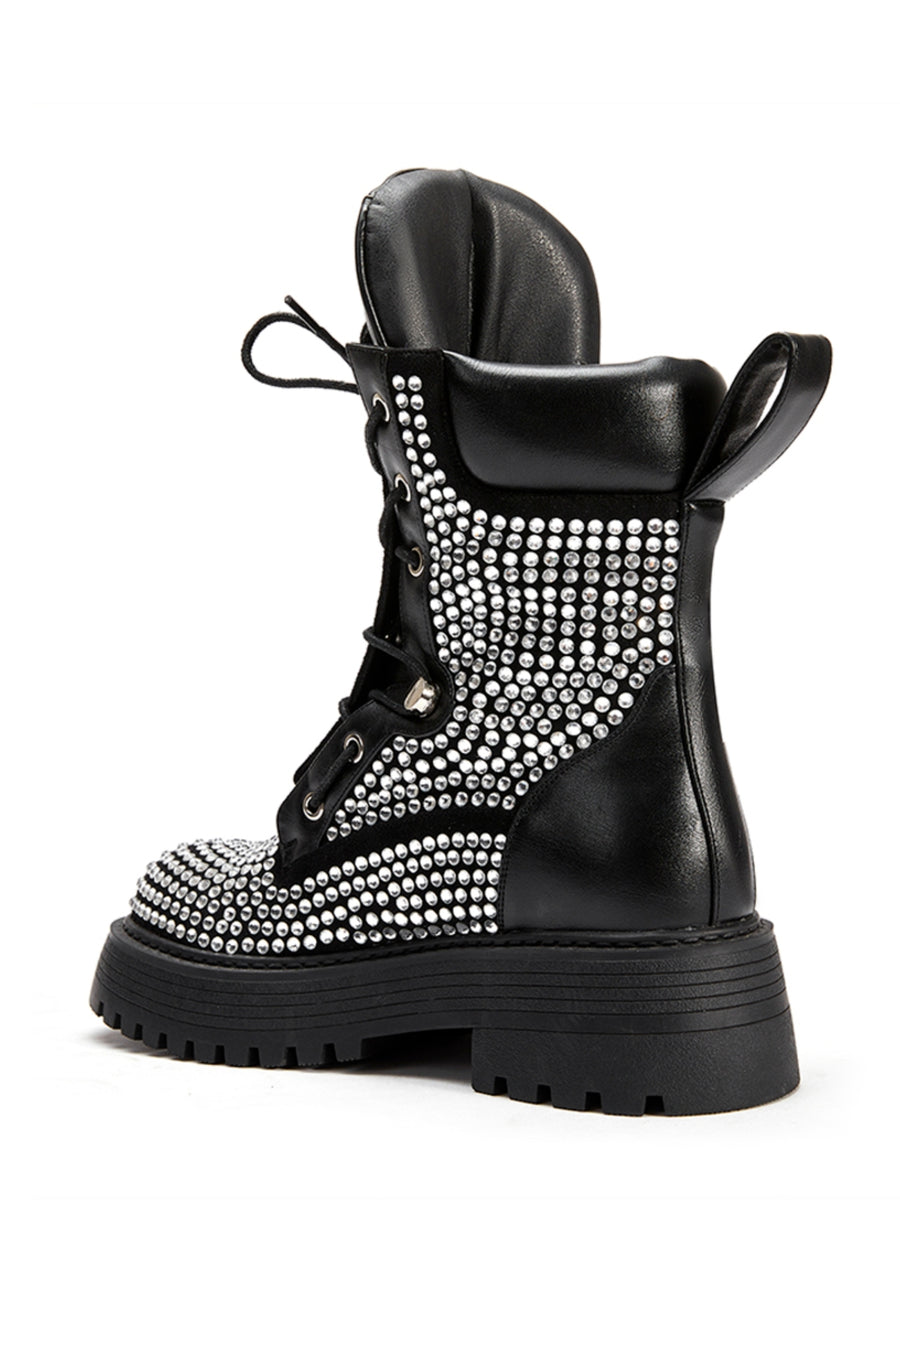 back view of sturdy black combat boots with a platform sole and silver rhinestone accent